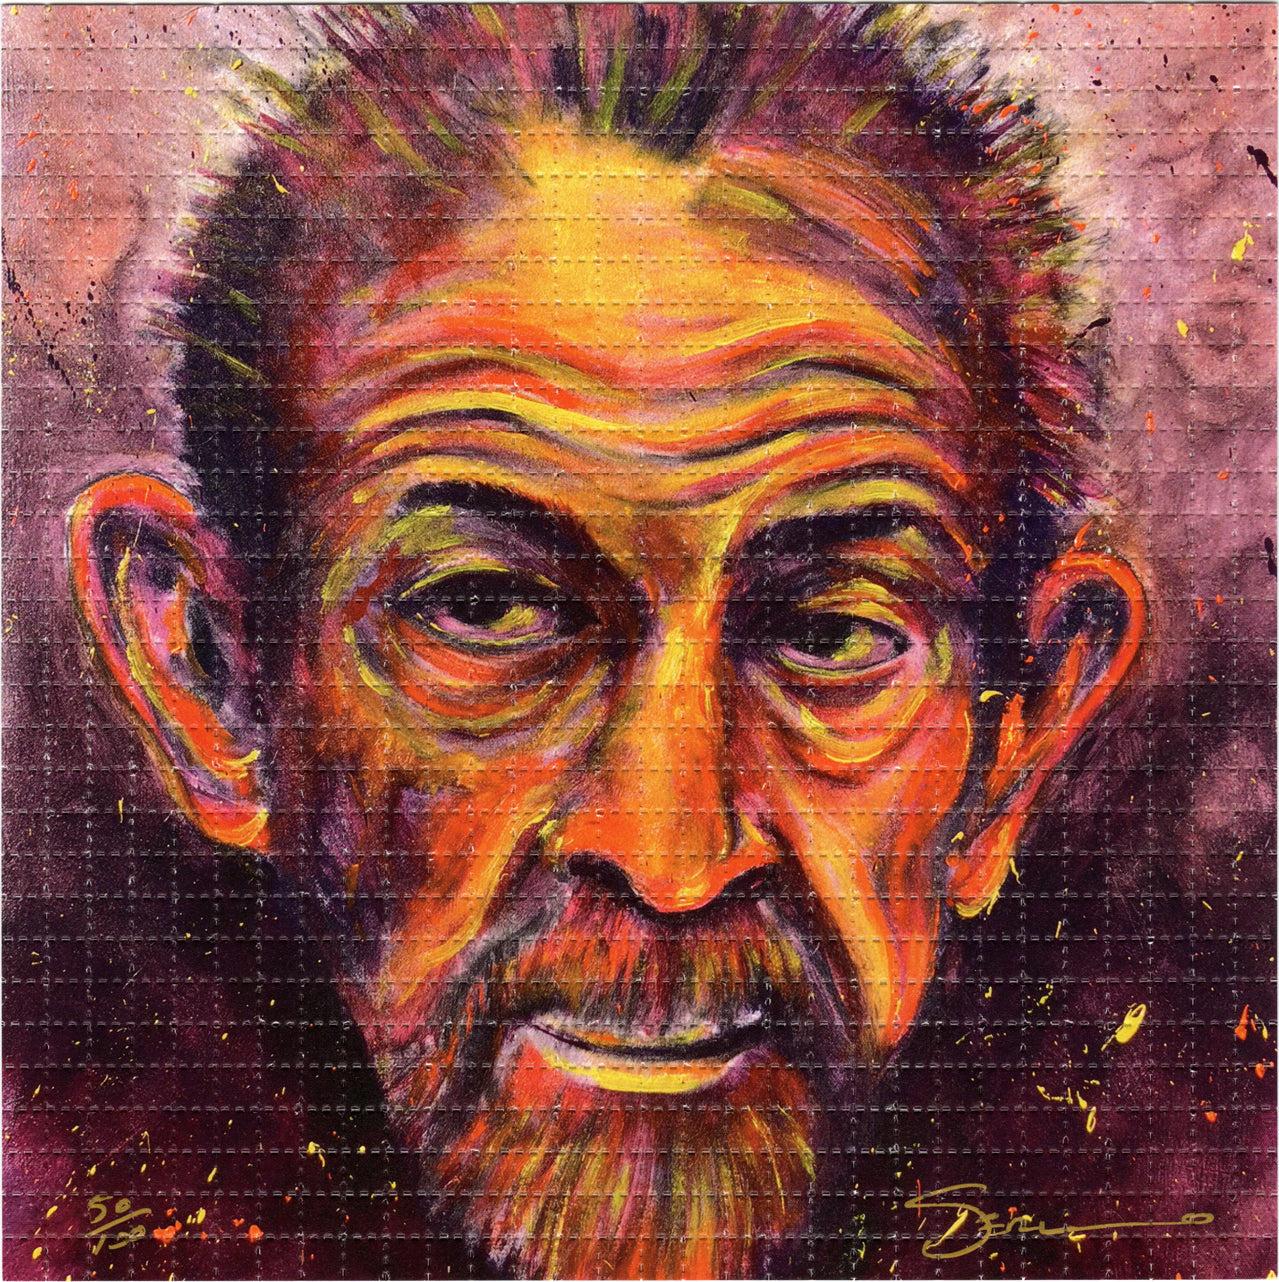 Owsley Stanley by Mark Serlo Limited Edition LSD blotter art print